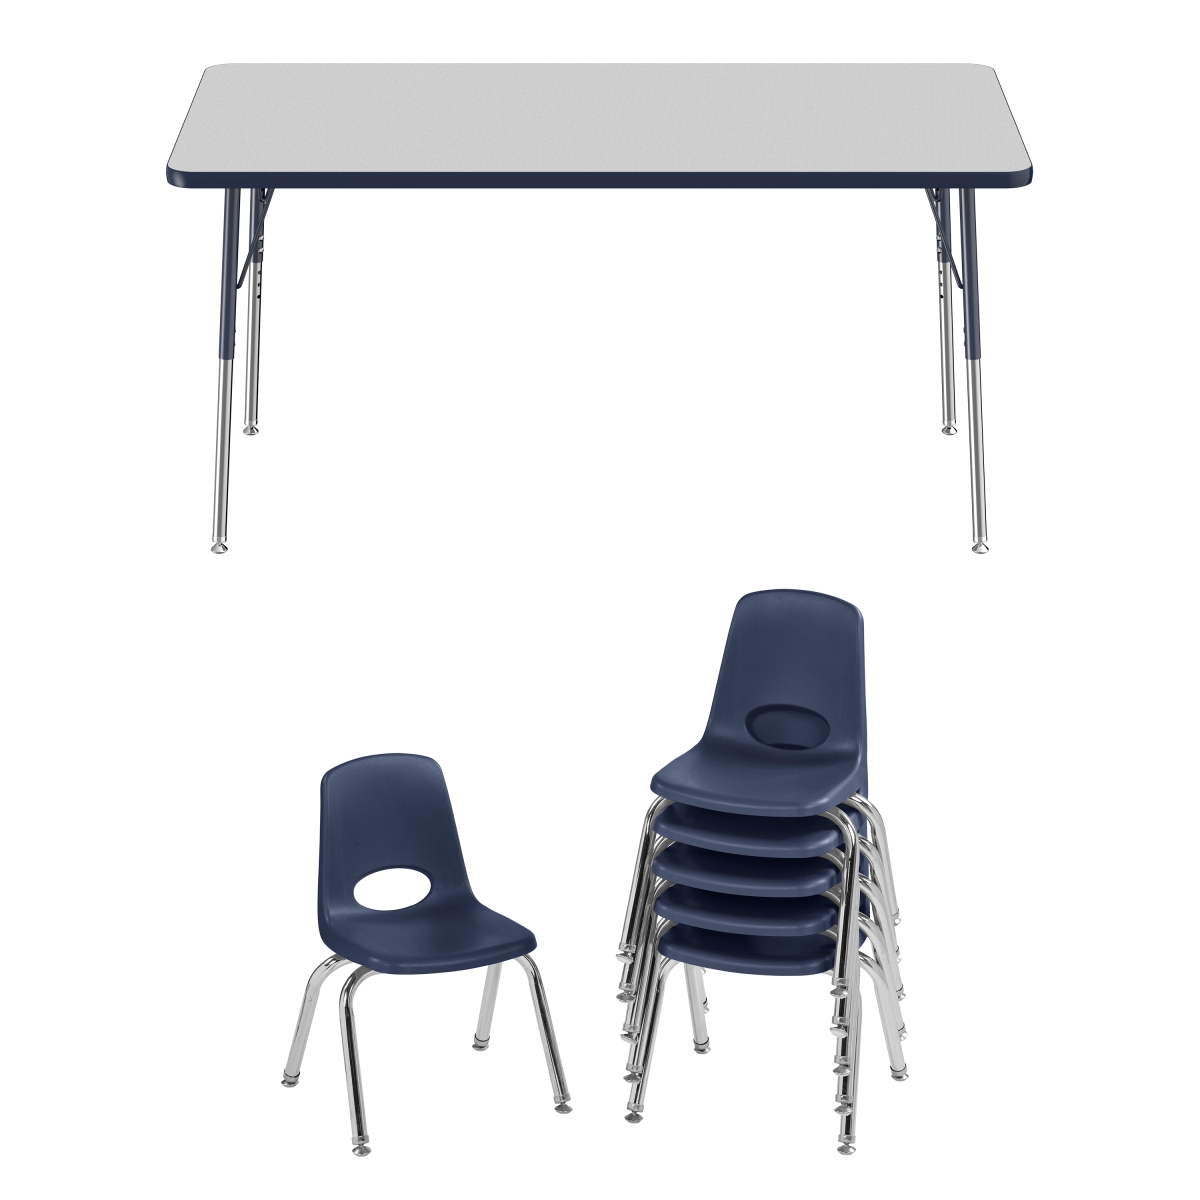 10303-gynv 30 X 60 In. Rectangle T-mold Adjustable Activity Table Standard Swivel With 6 Stack Chairs 12 In. Swivel Glide - Grey & Navy